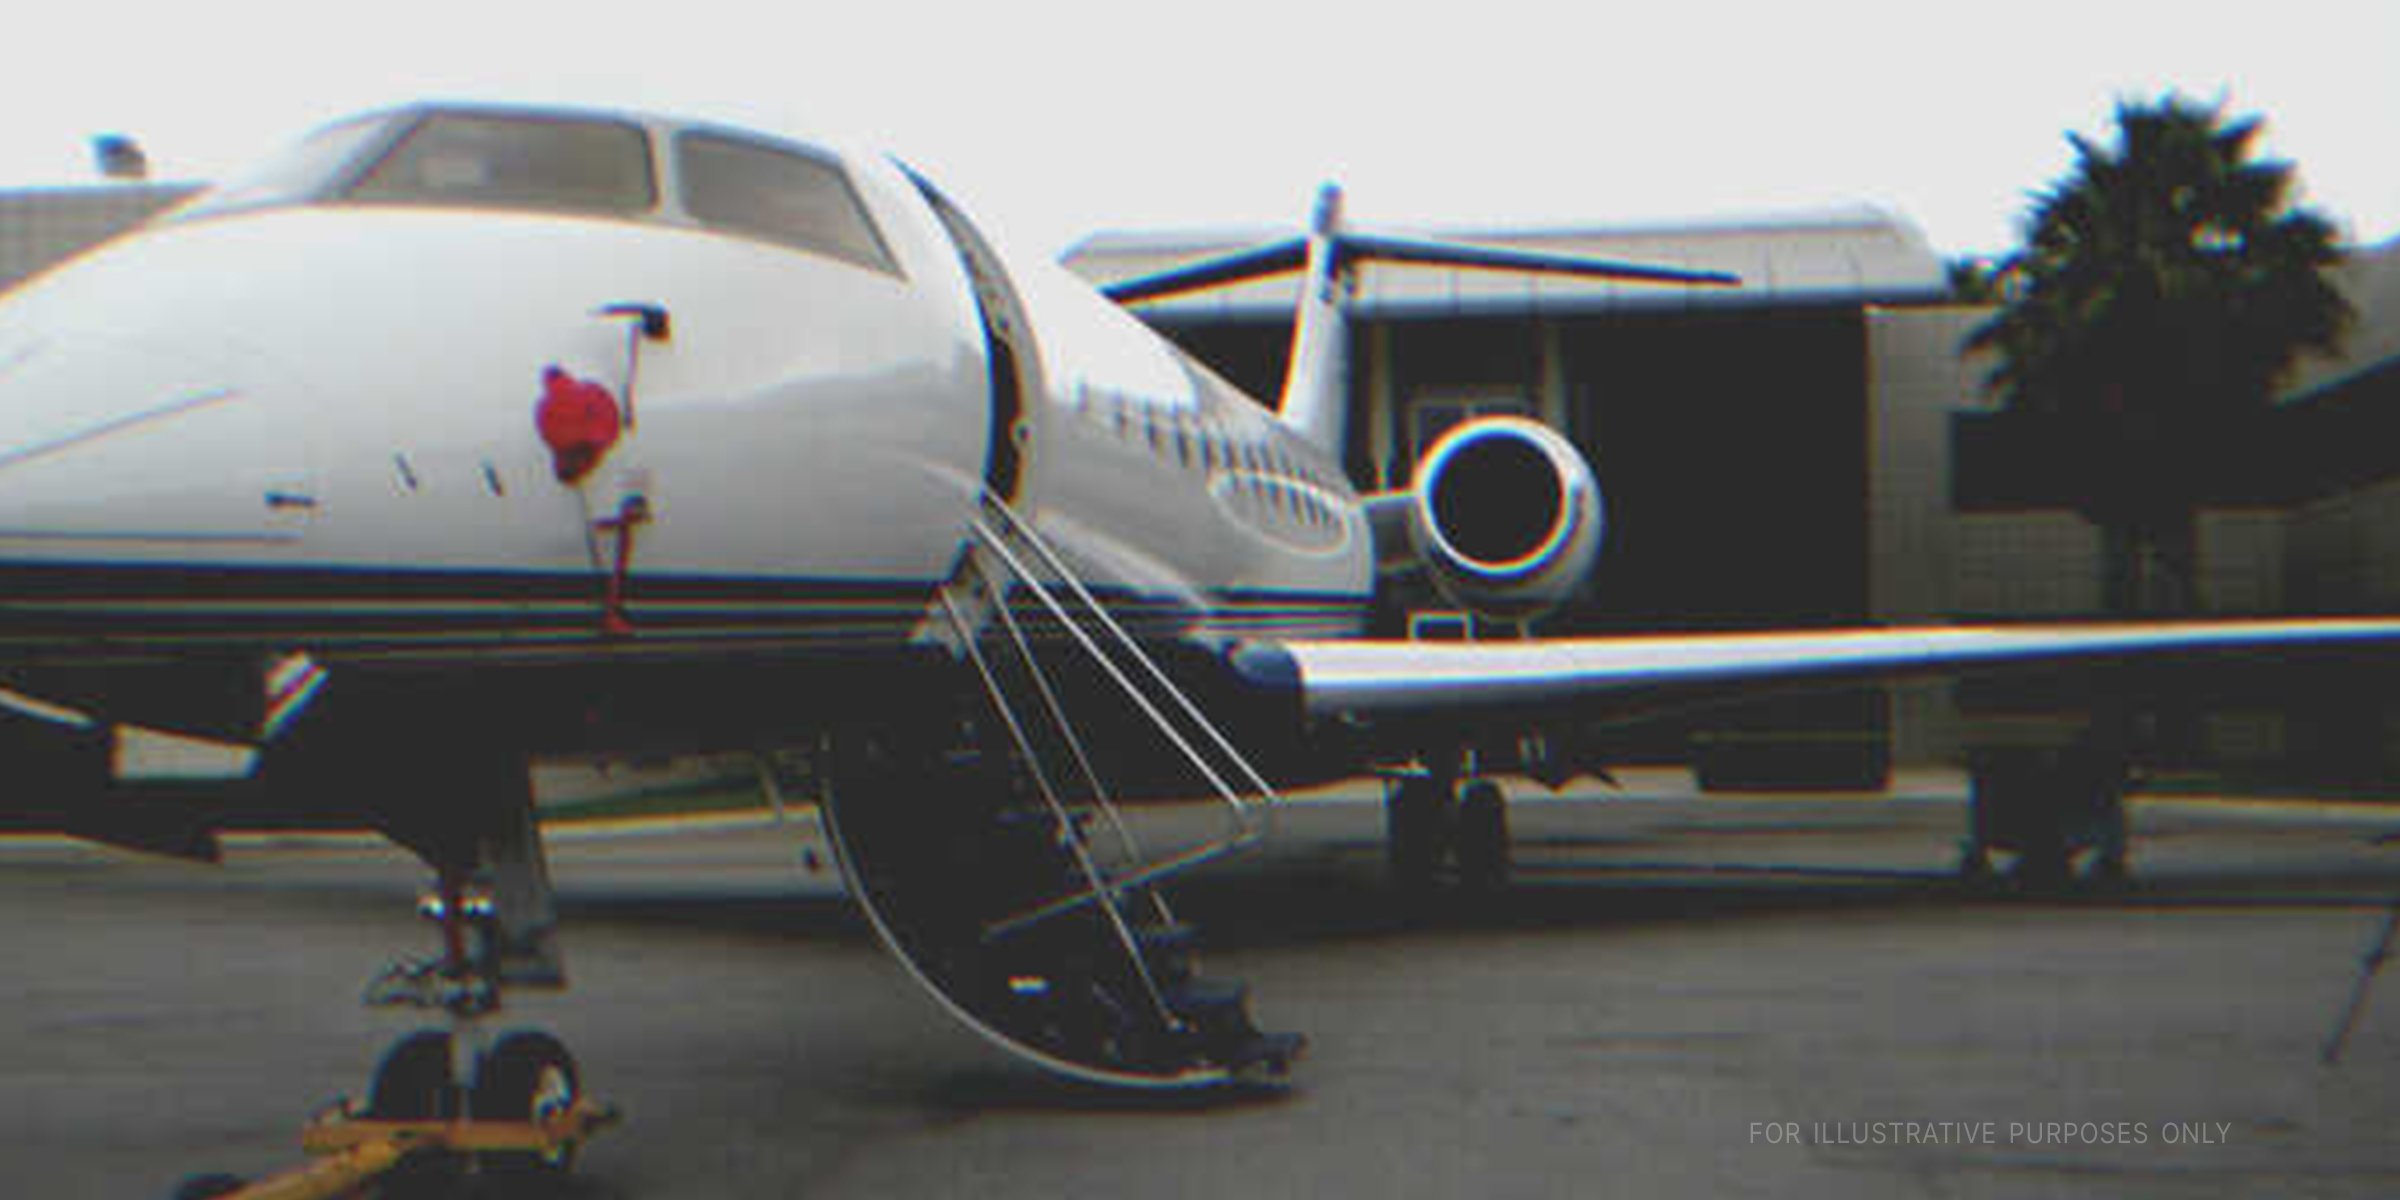 Private jet in an airport | Flickr / Shine 2010 (CC BY 2.0)